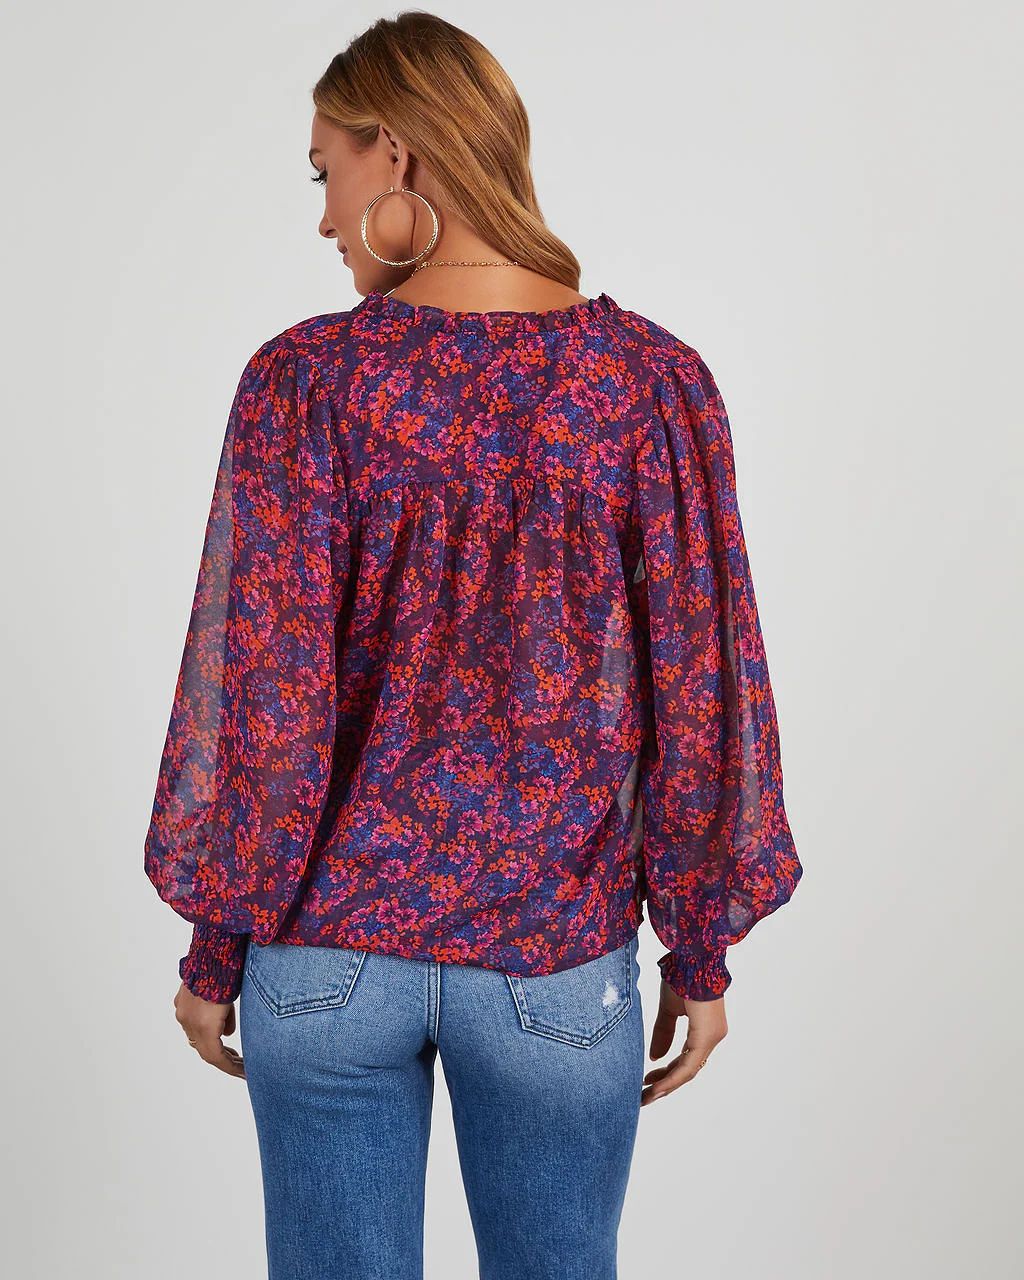 Chase The Feeling Floral Blouse | VICI Collection